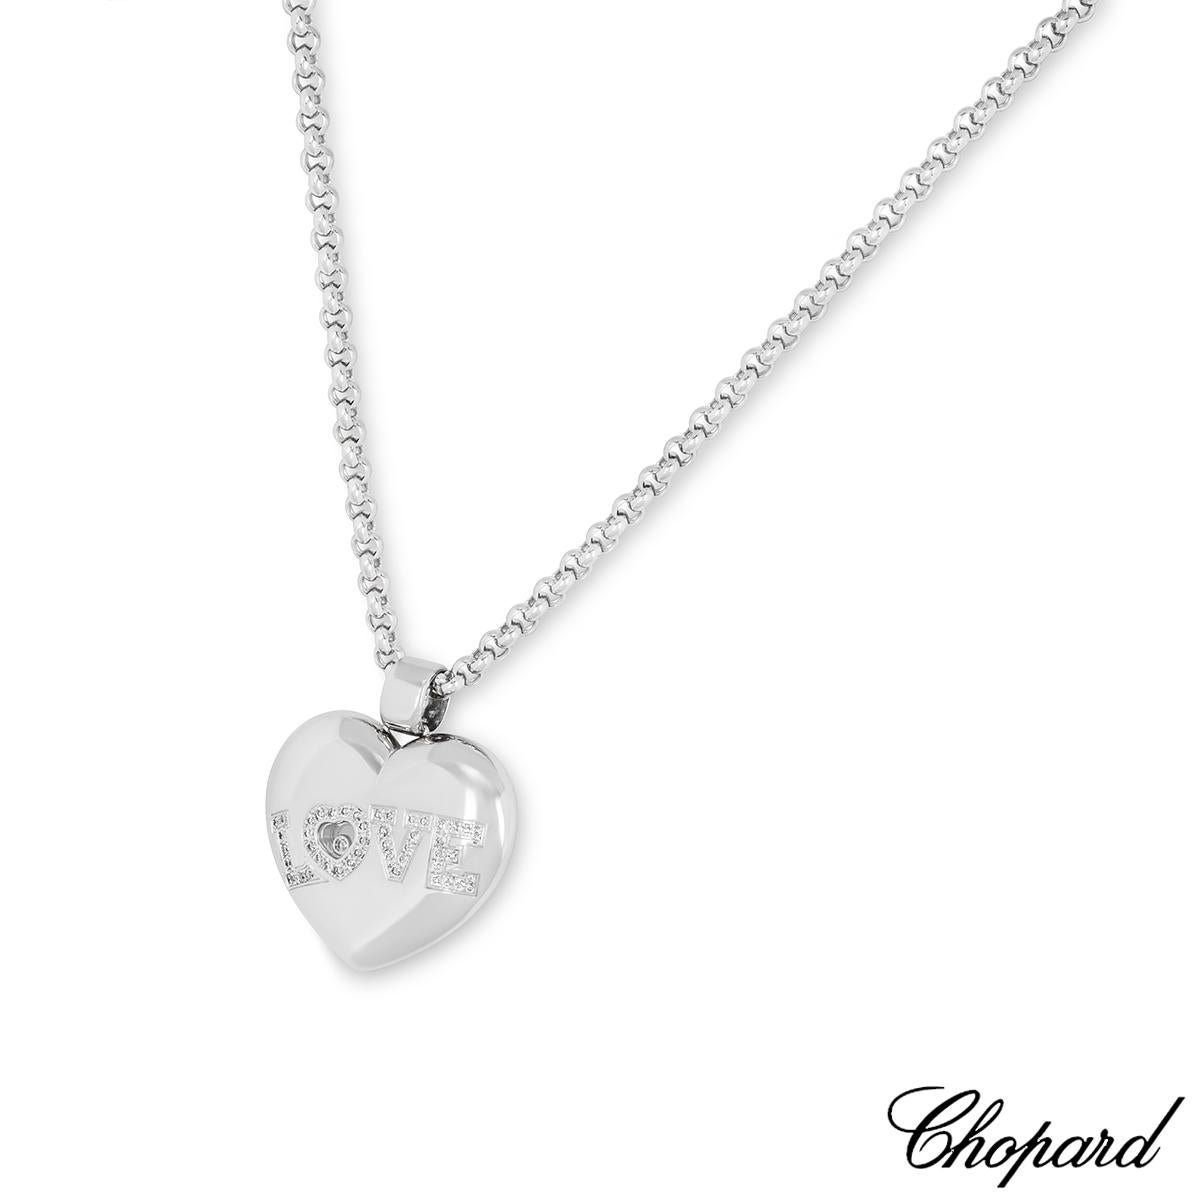 A beautiful Chopard 18k white gold diamond heart pendant from the Happy Diamonds collection. The heart pendant comprises of one floating round brilliant cut diamond encased behind the signature Chopard signed glass, weighing 0.05ct. Complemented